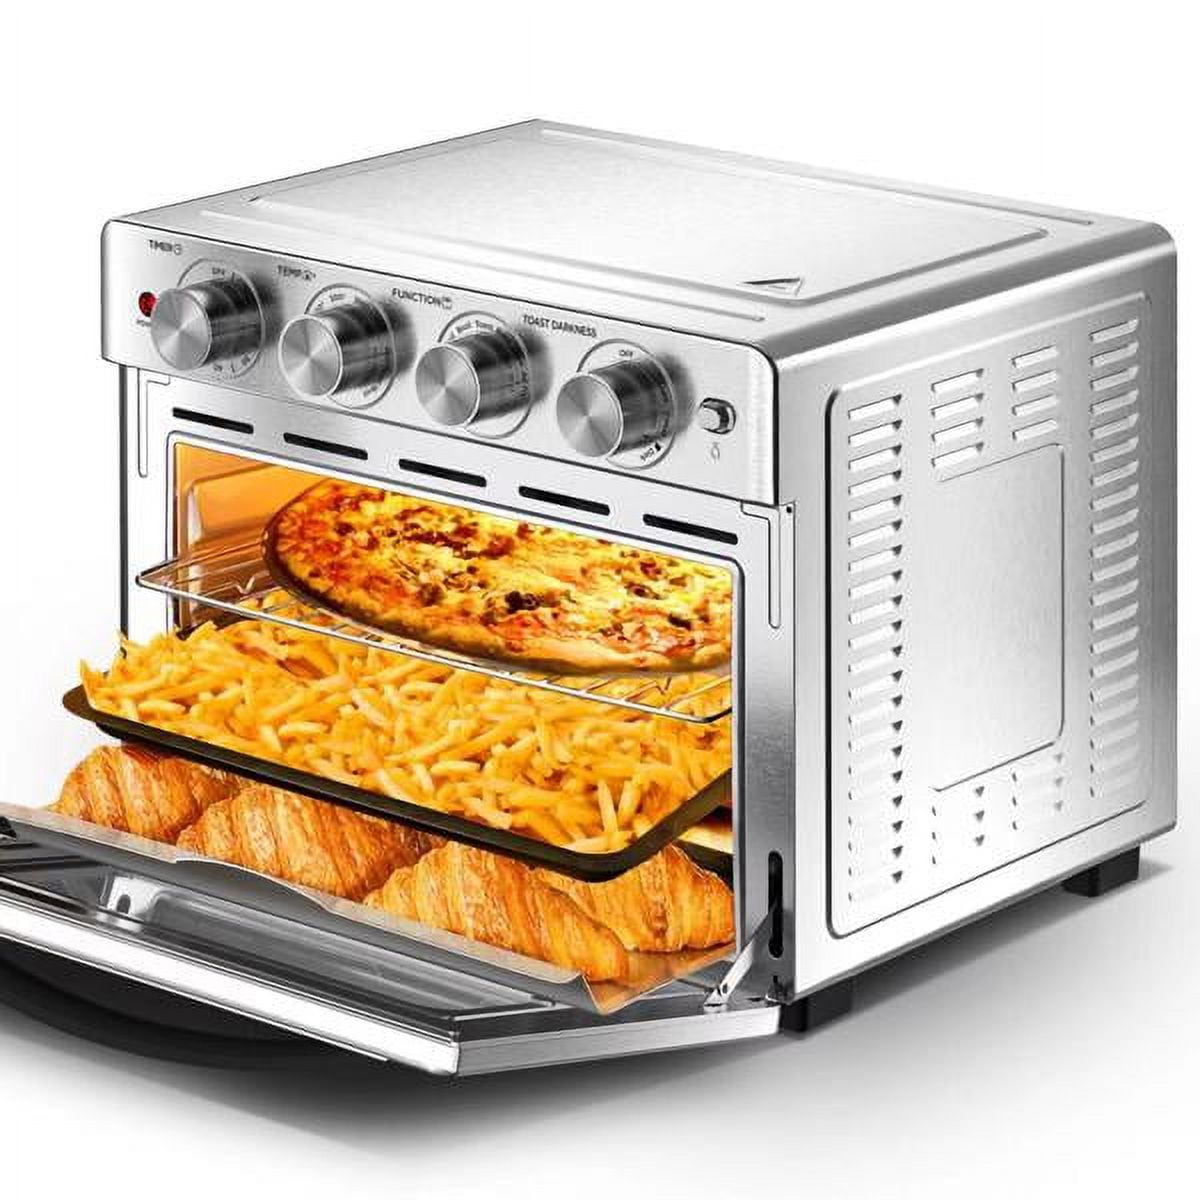 VEVOR Commercial Convection Oven, 66L/60Qt, Half-Size Conventional Oven Countertop, 1800W 4-Tier Toaster w/ Front Glass Door, E